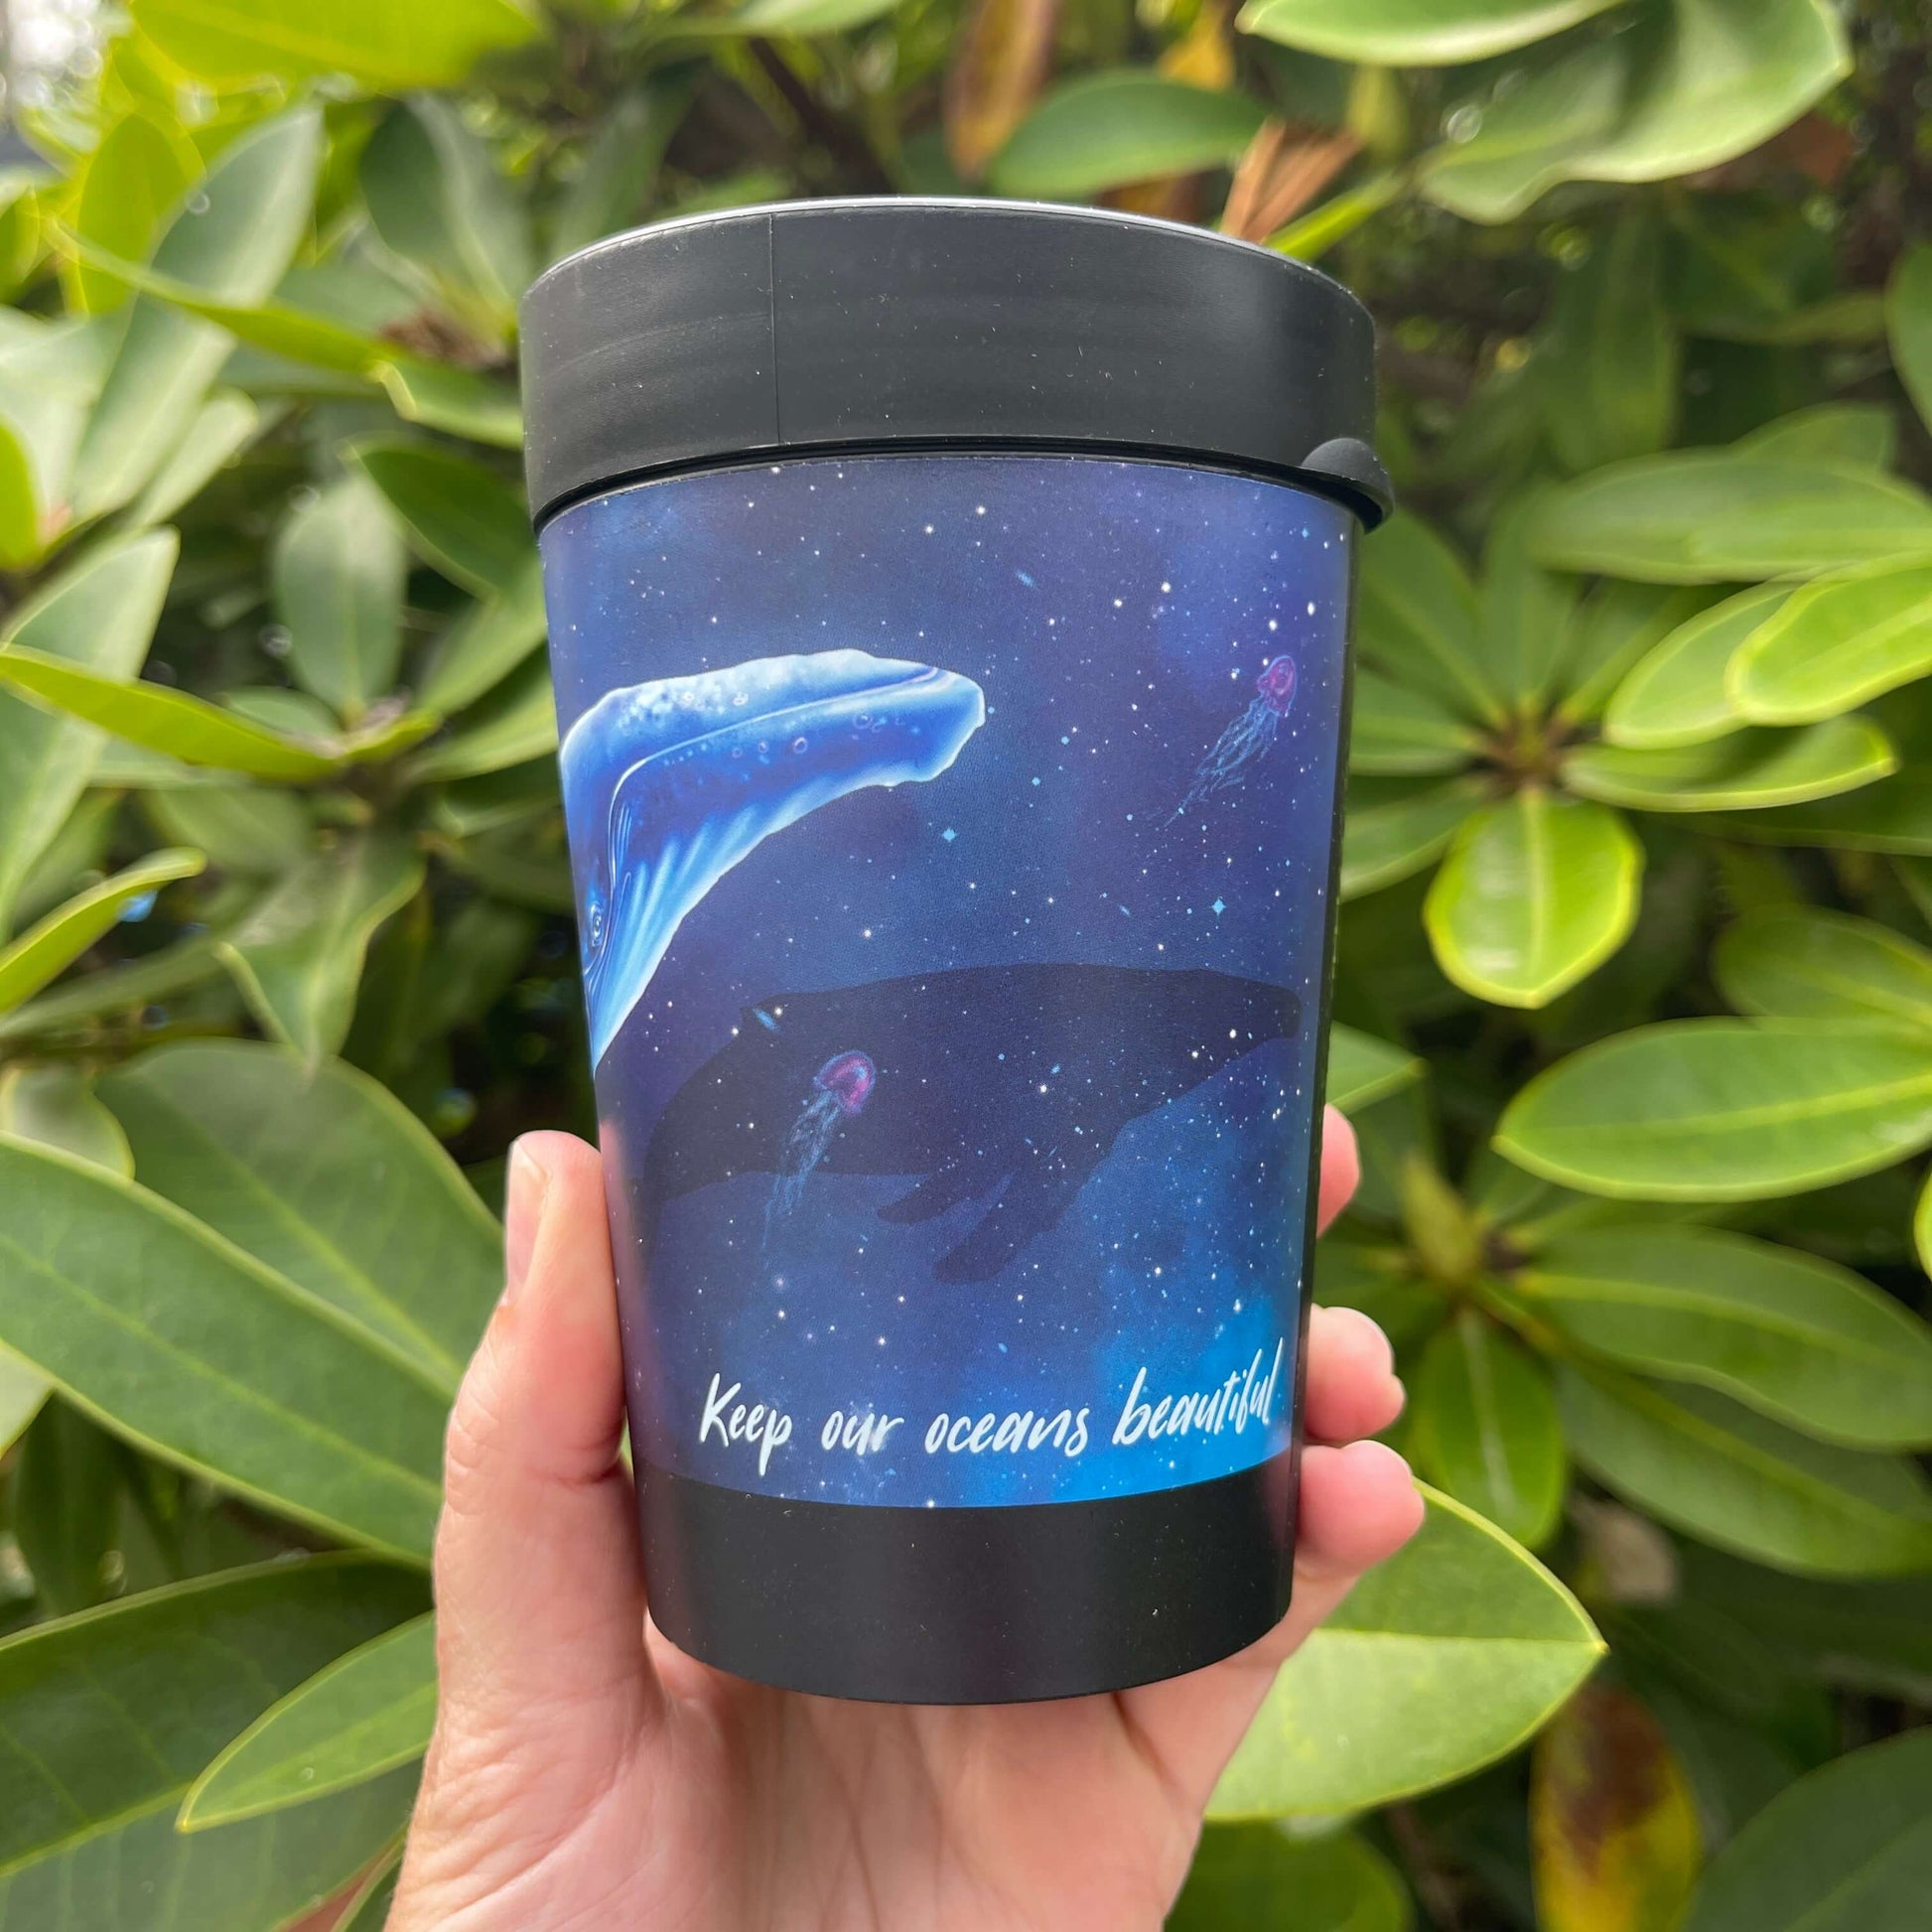 Black reusable coffee cup with blue galaxy wrap featuring a Humpback whale and the words "Keep our oceans beautiful".